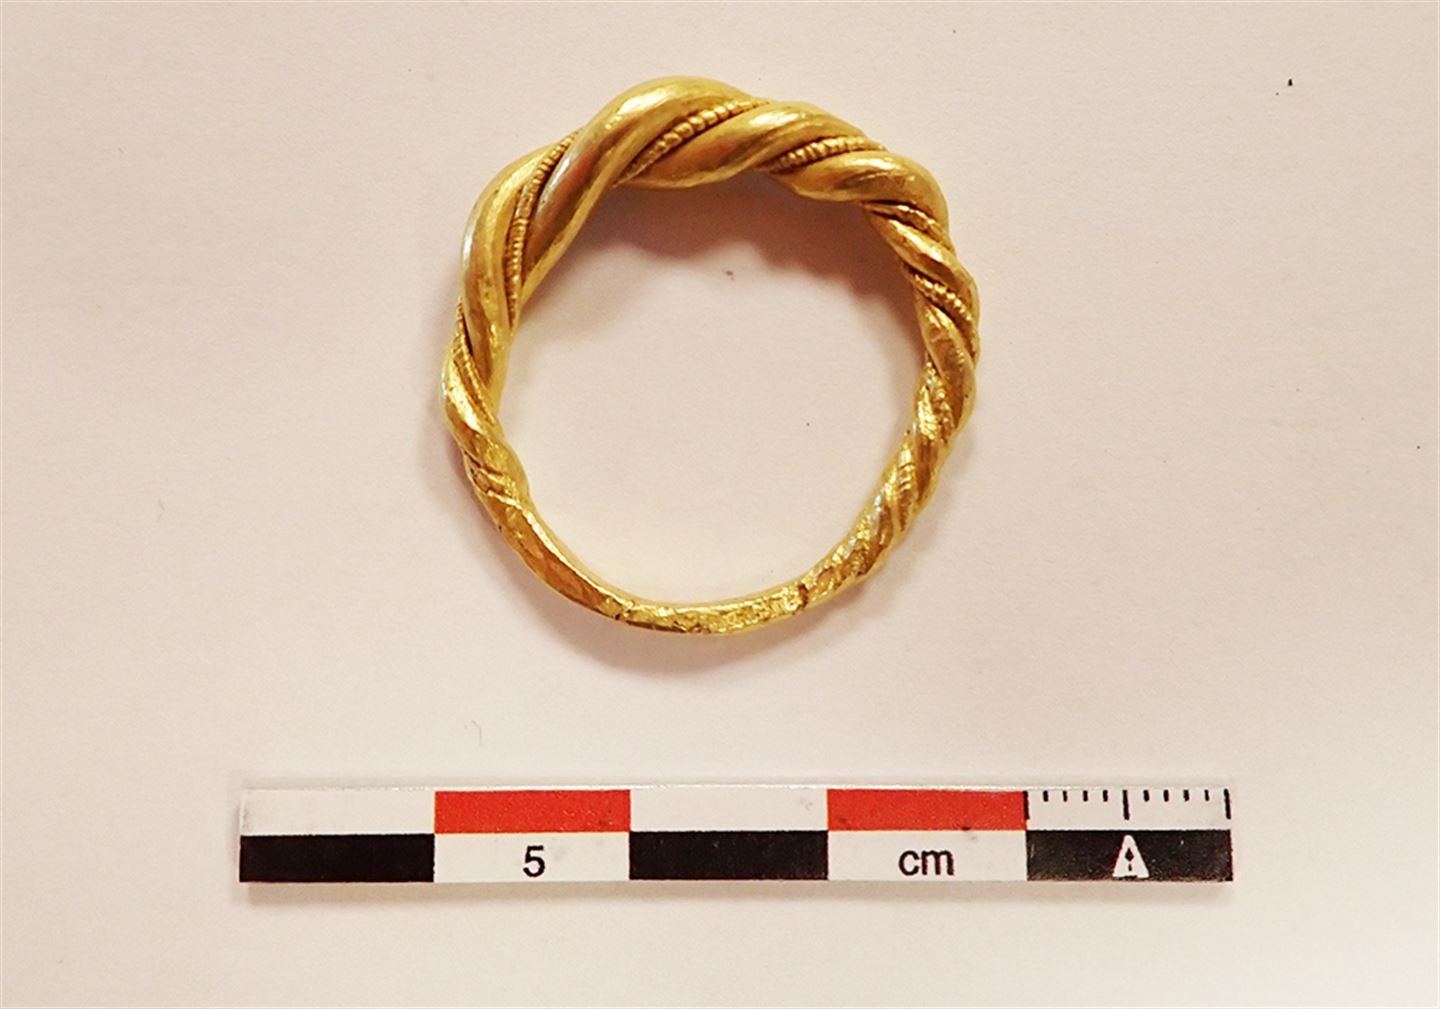 Viking gold ring found in estate auction box lot